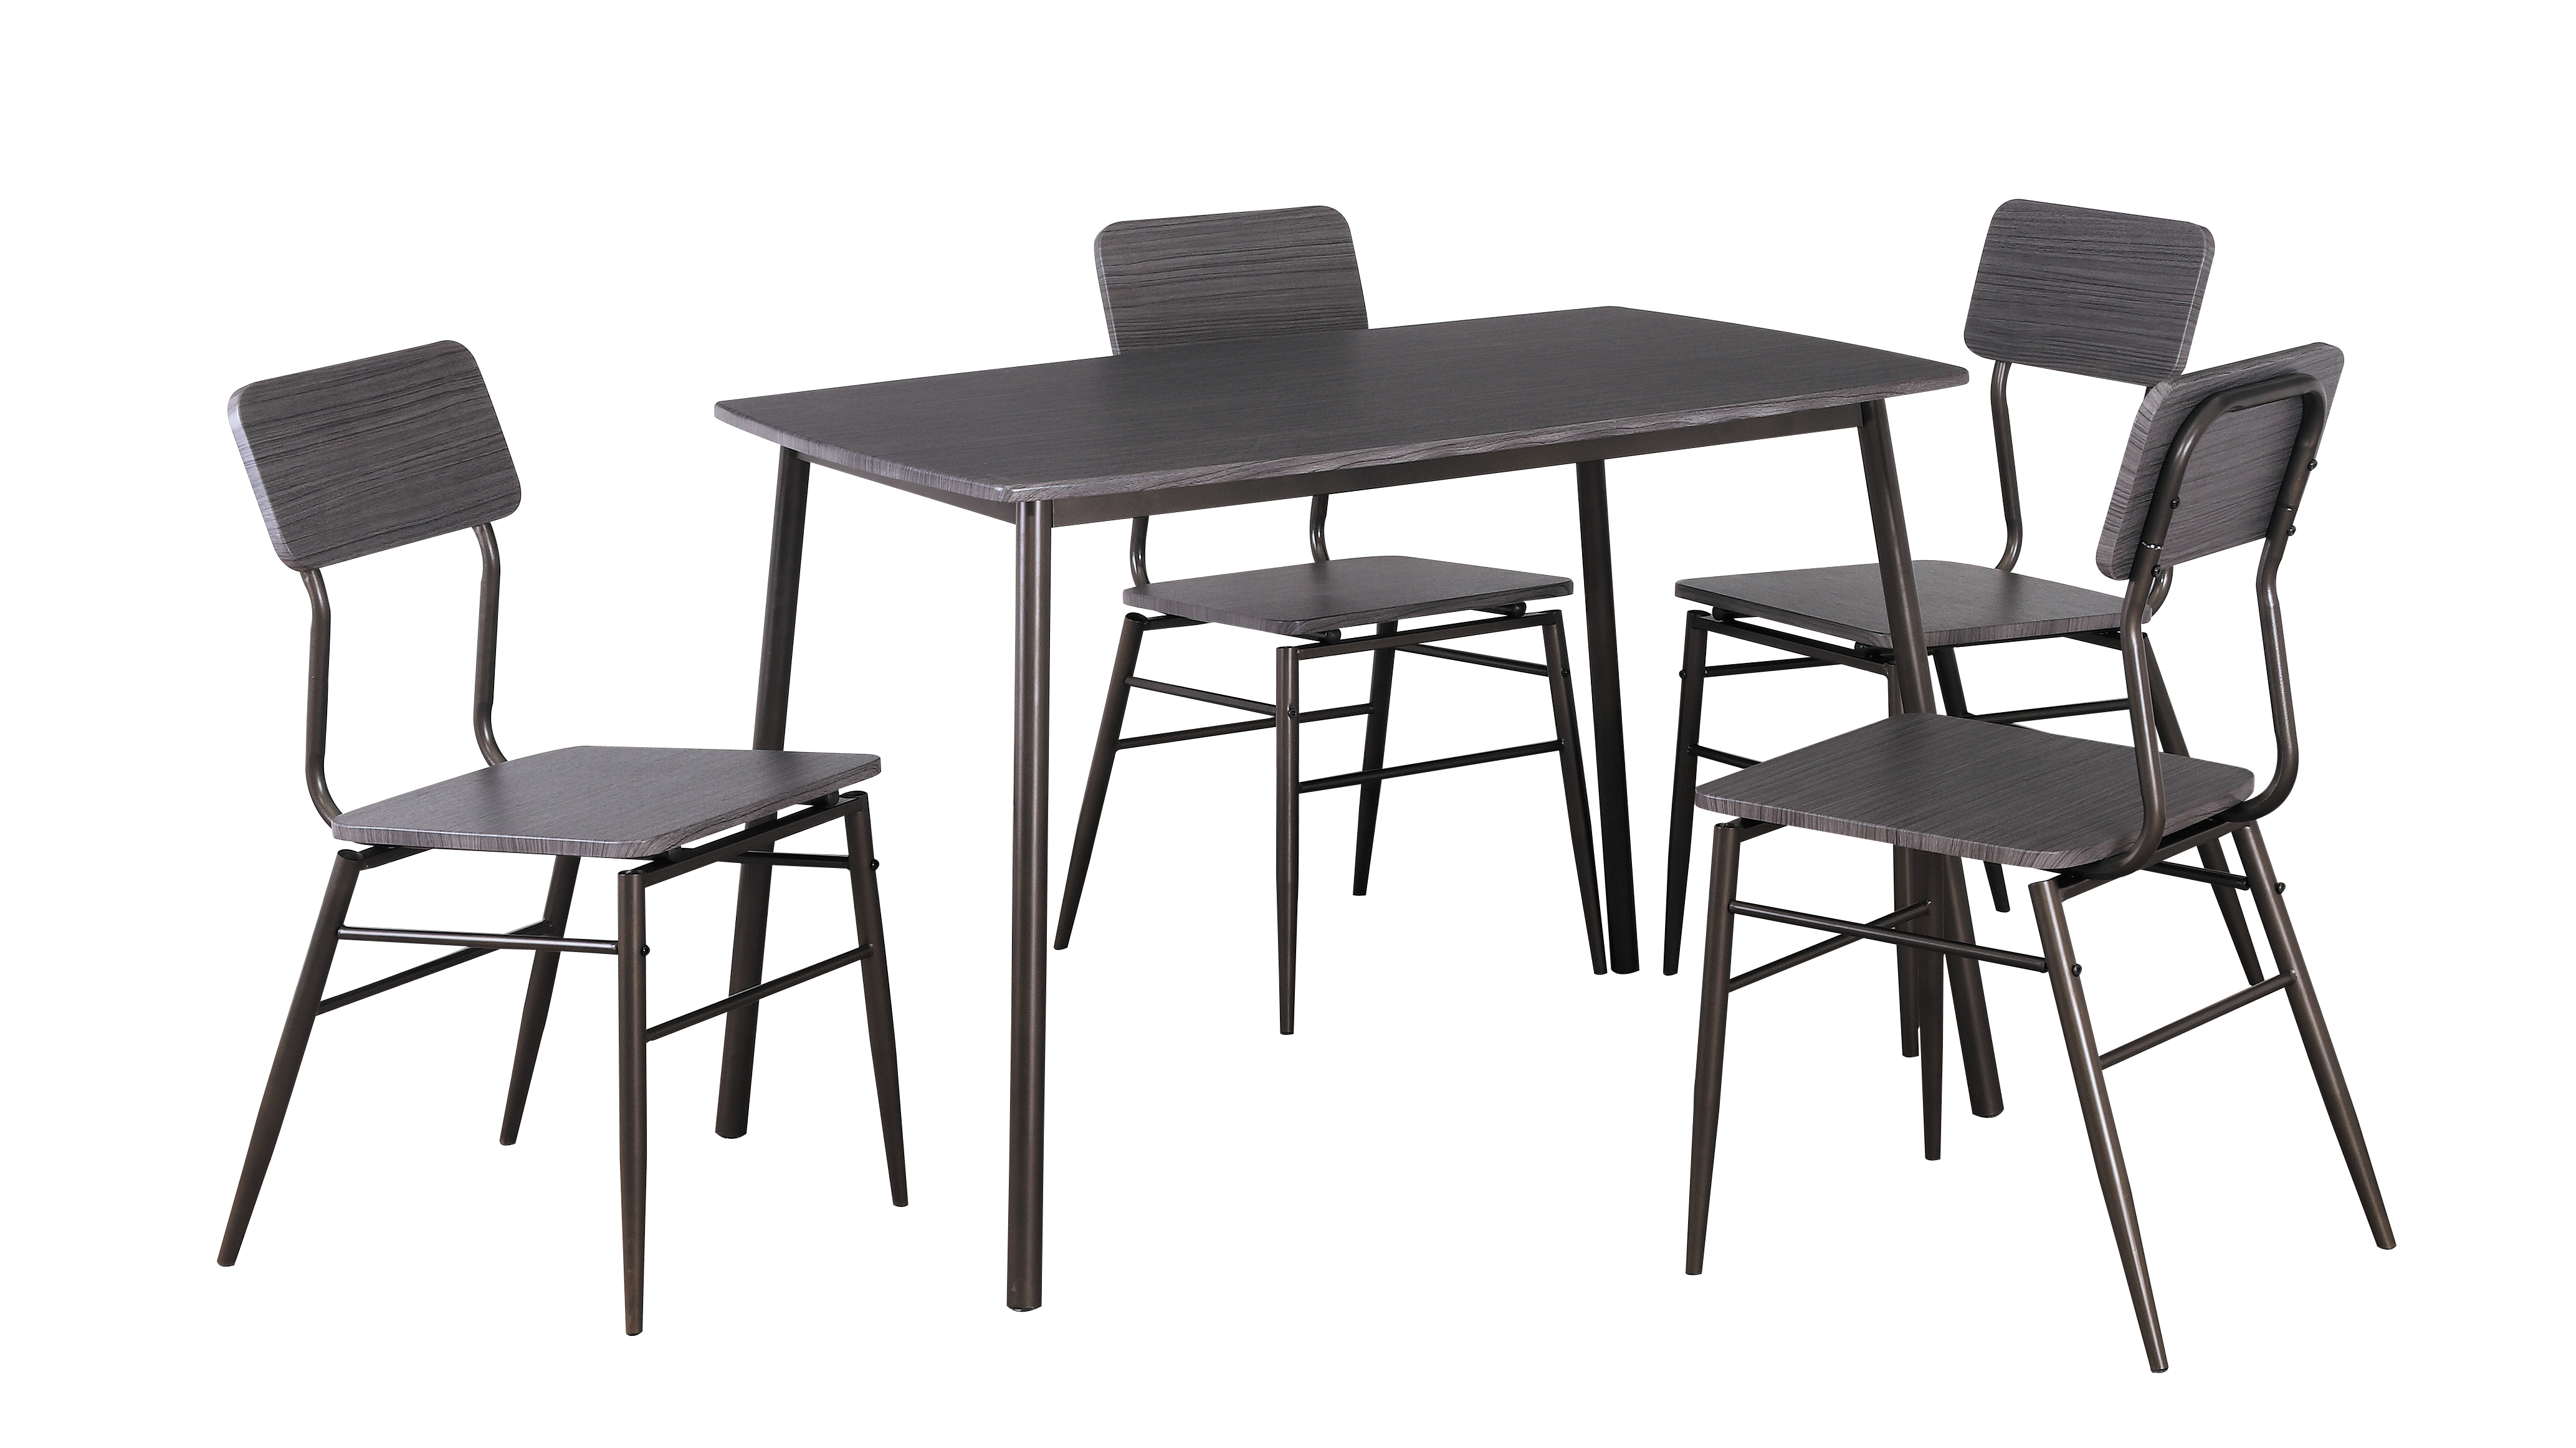 Renewable Design for 8 Seater Glass Table - GS-5147 5PC DINING SET – Xinhai